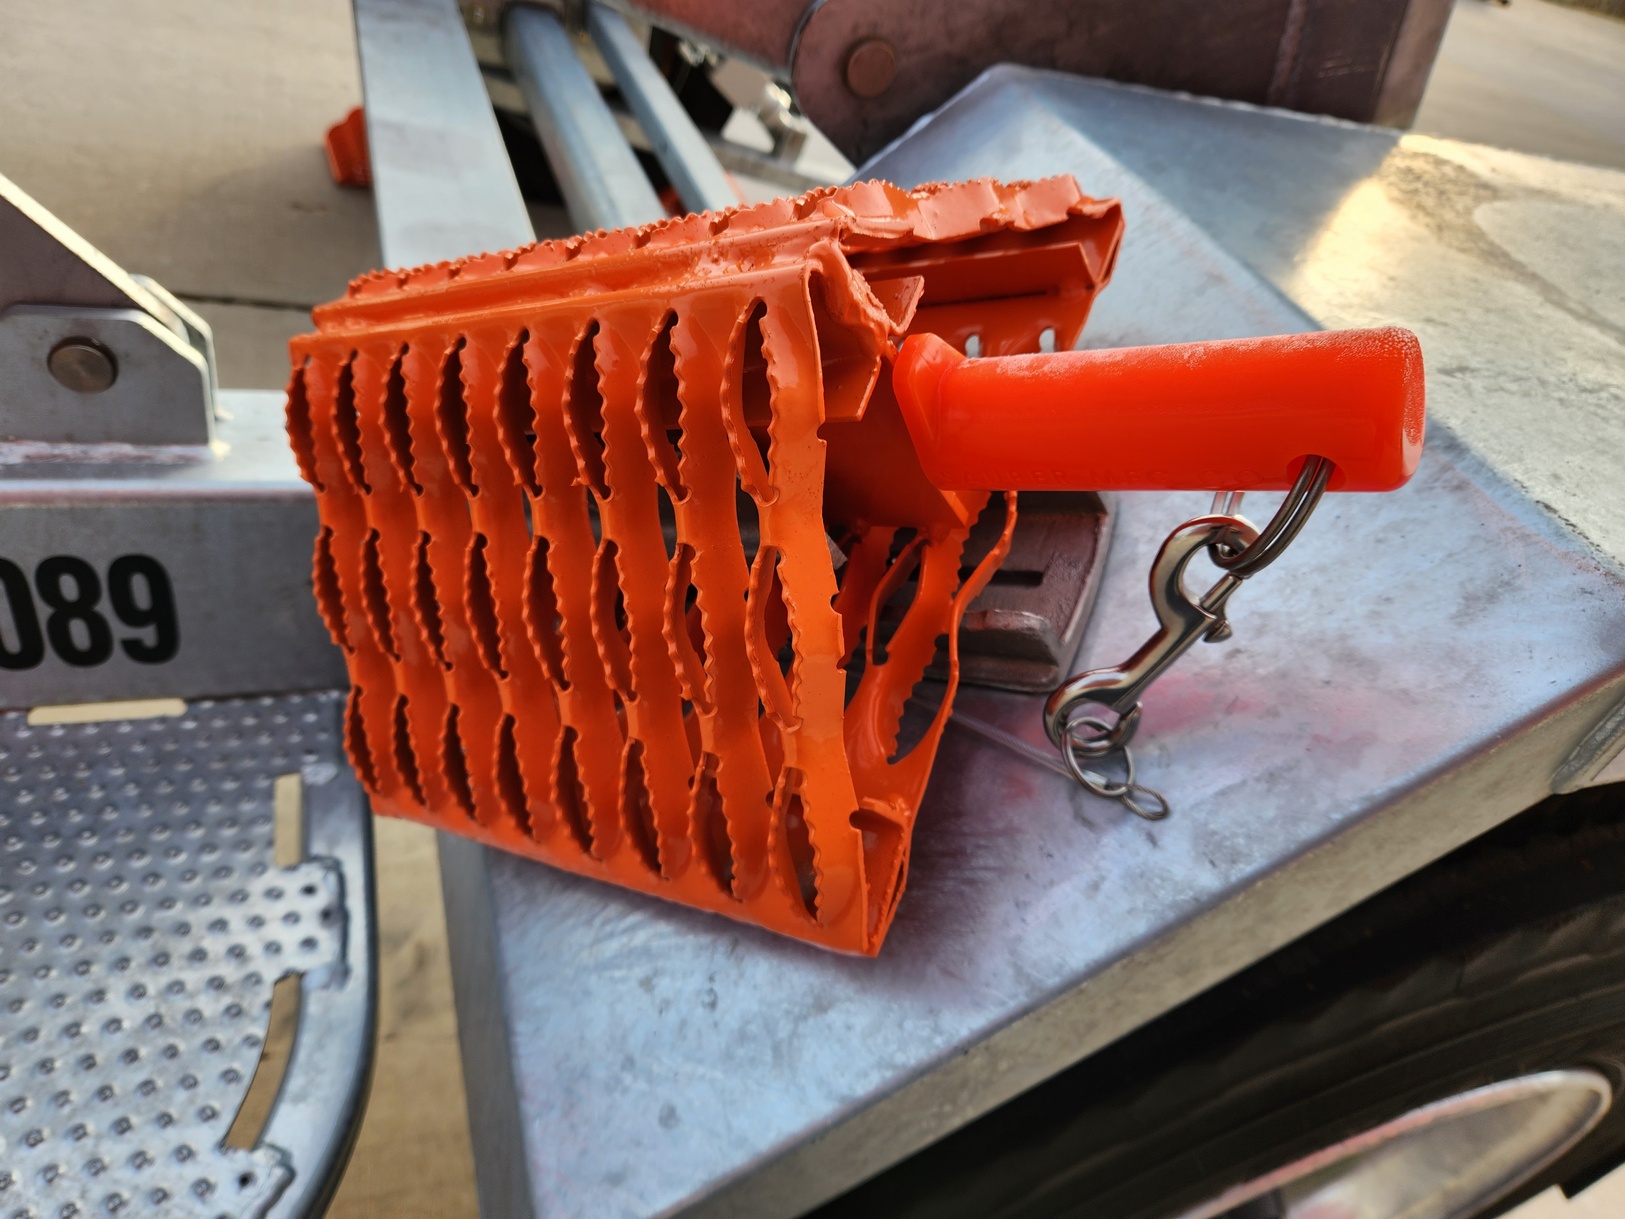 Sauber Mfg. Co. Model 8500-FO All Weather Wheel Chock with Orange Powder Coat Finish and 8501-R Almag Wheel Chock Holder mounted to trailer fender at an angle for easier access from the side.